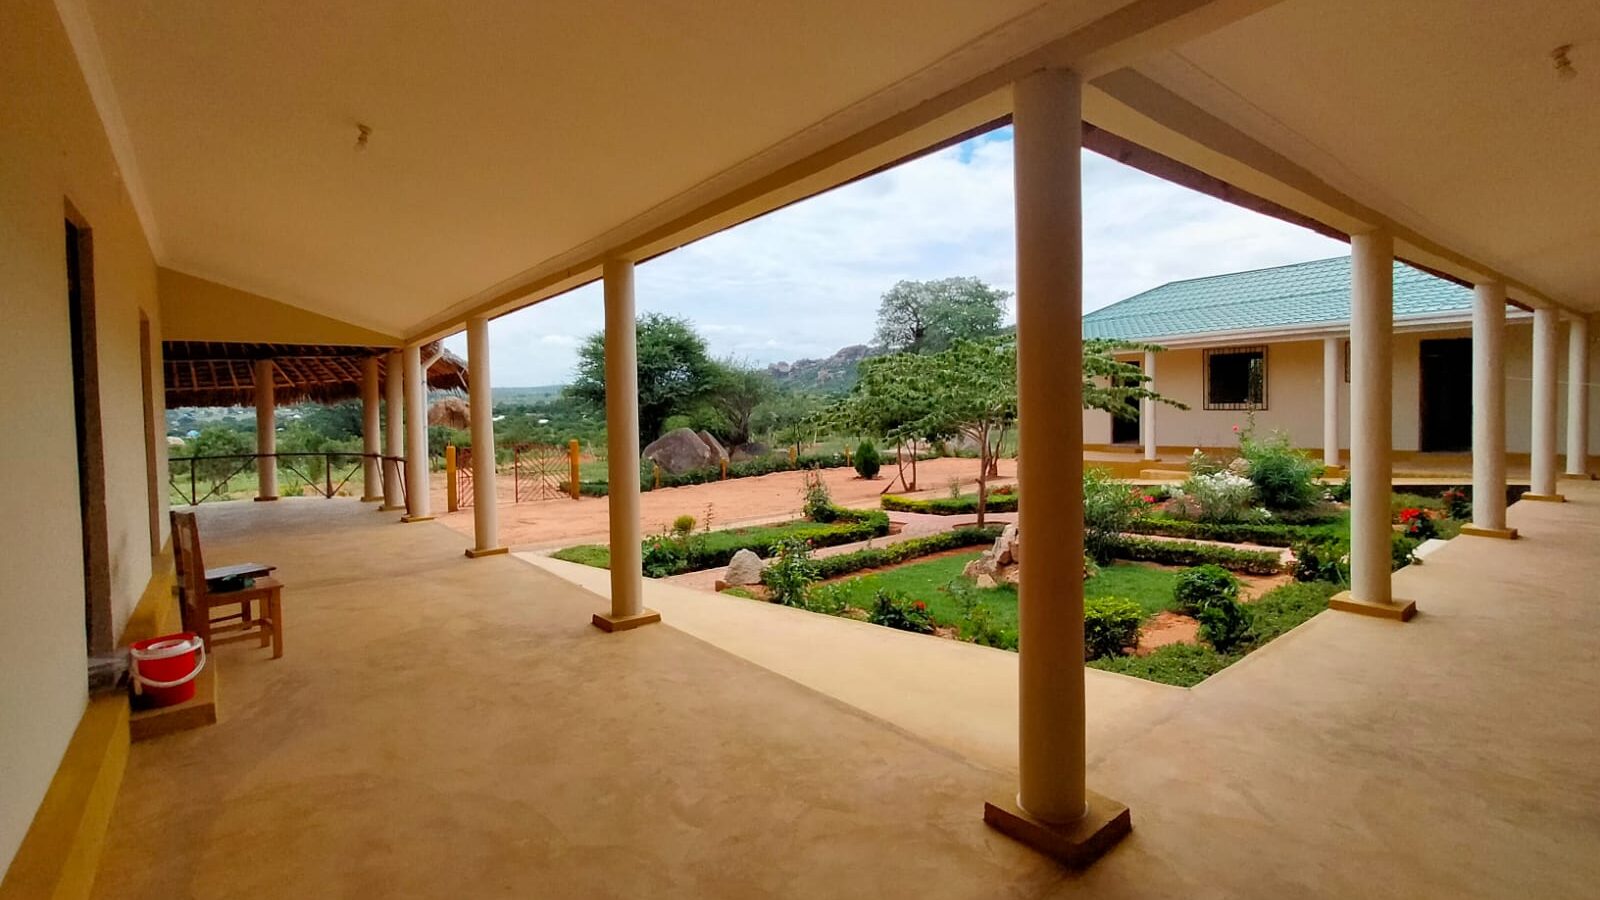 The Multifunctional House in Chigongwe